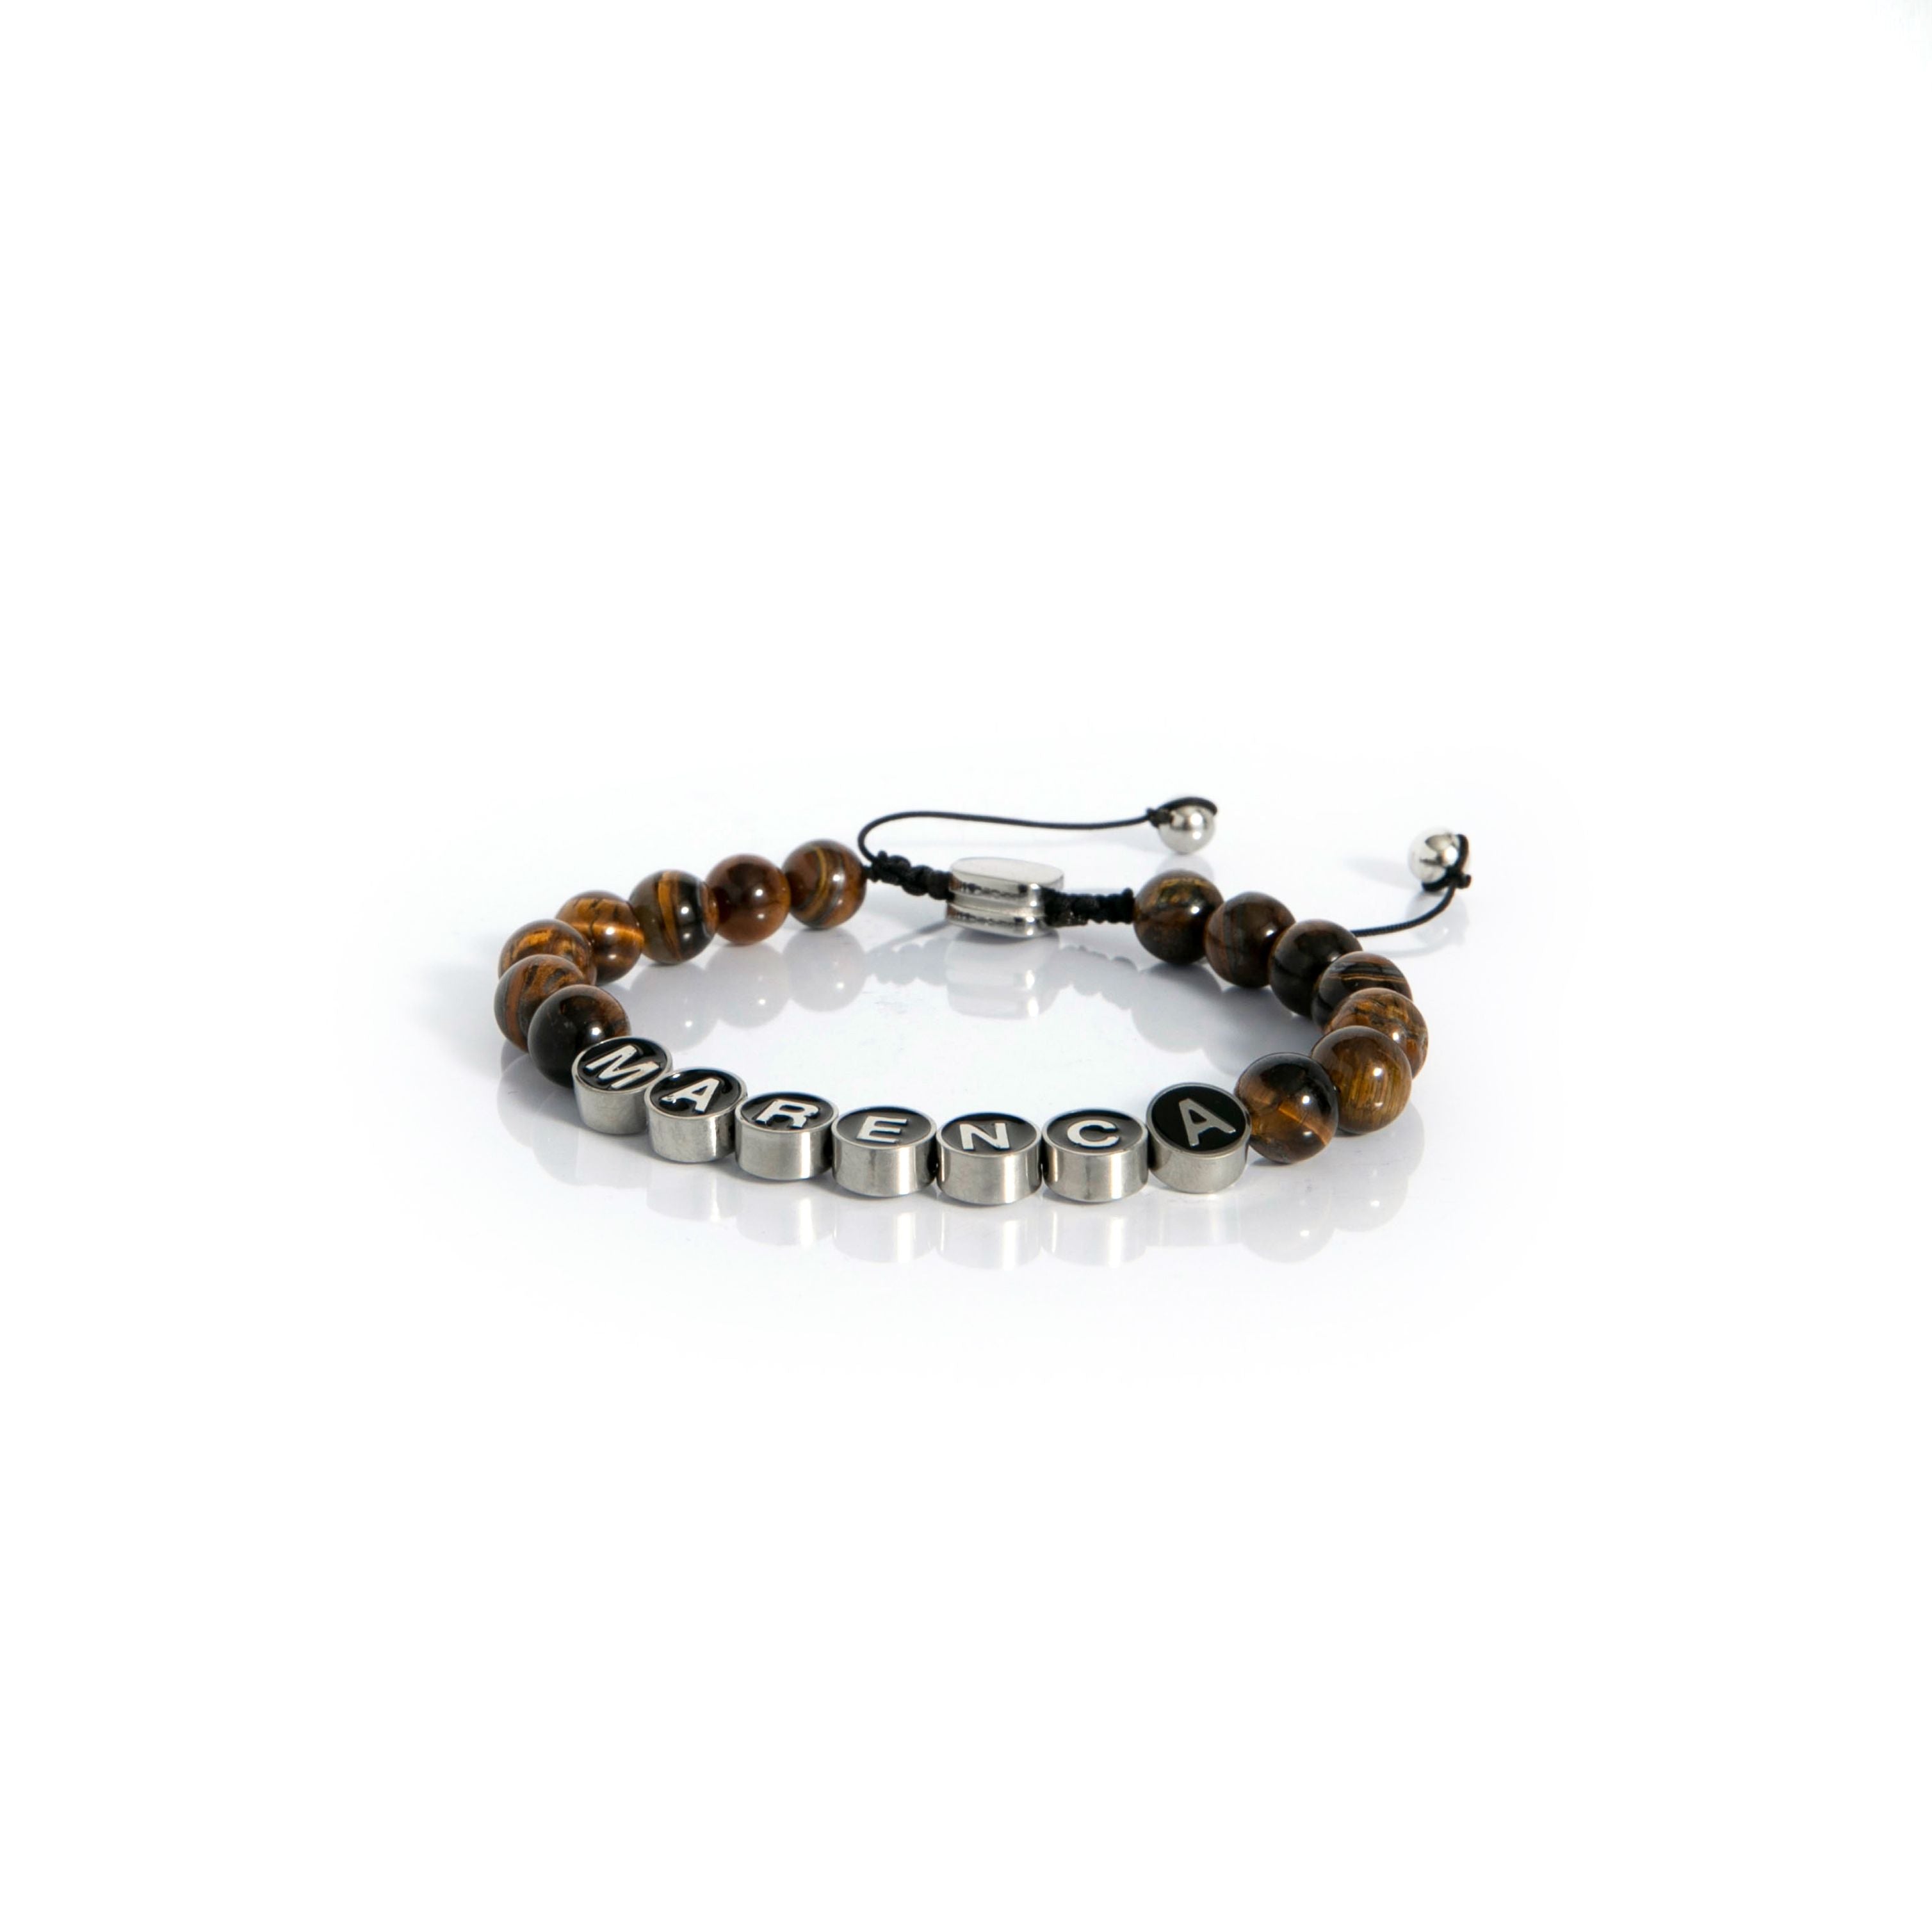 Tiger Eye Beads Bracelet with Marenca Beads, side view